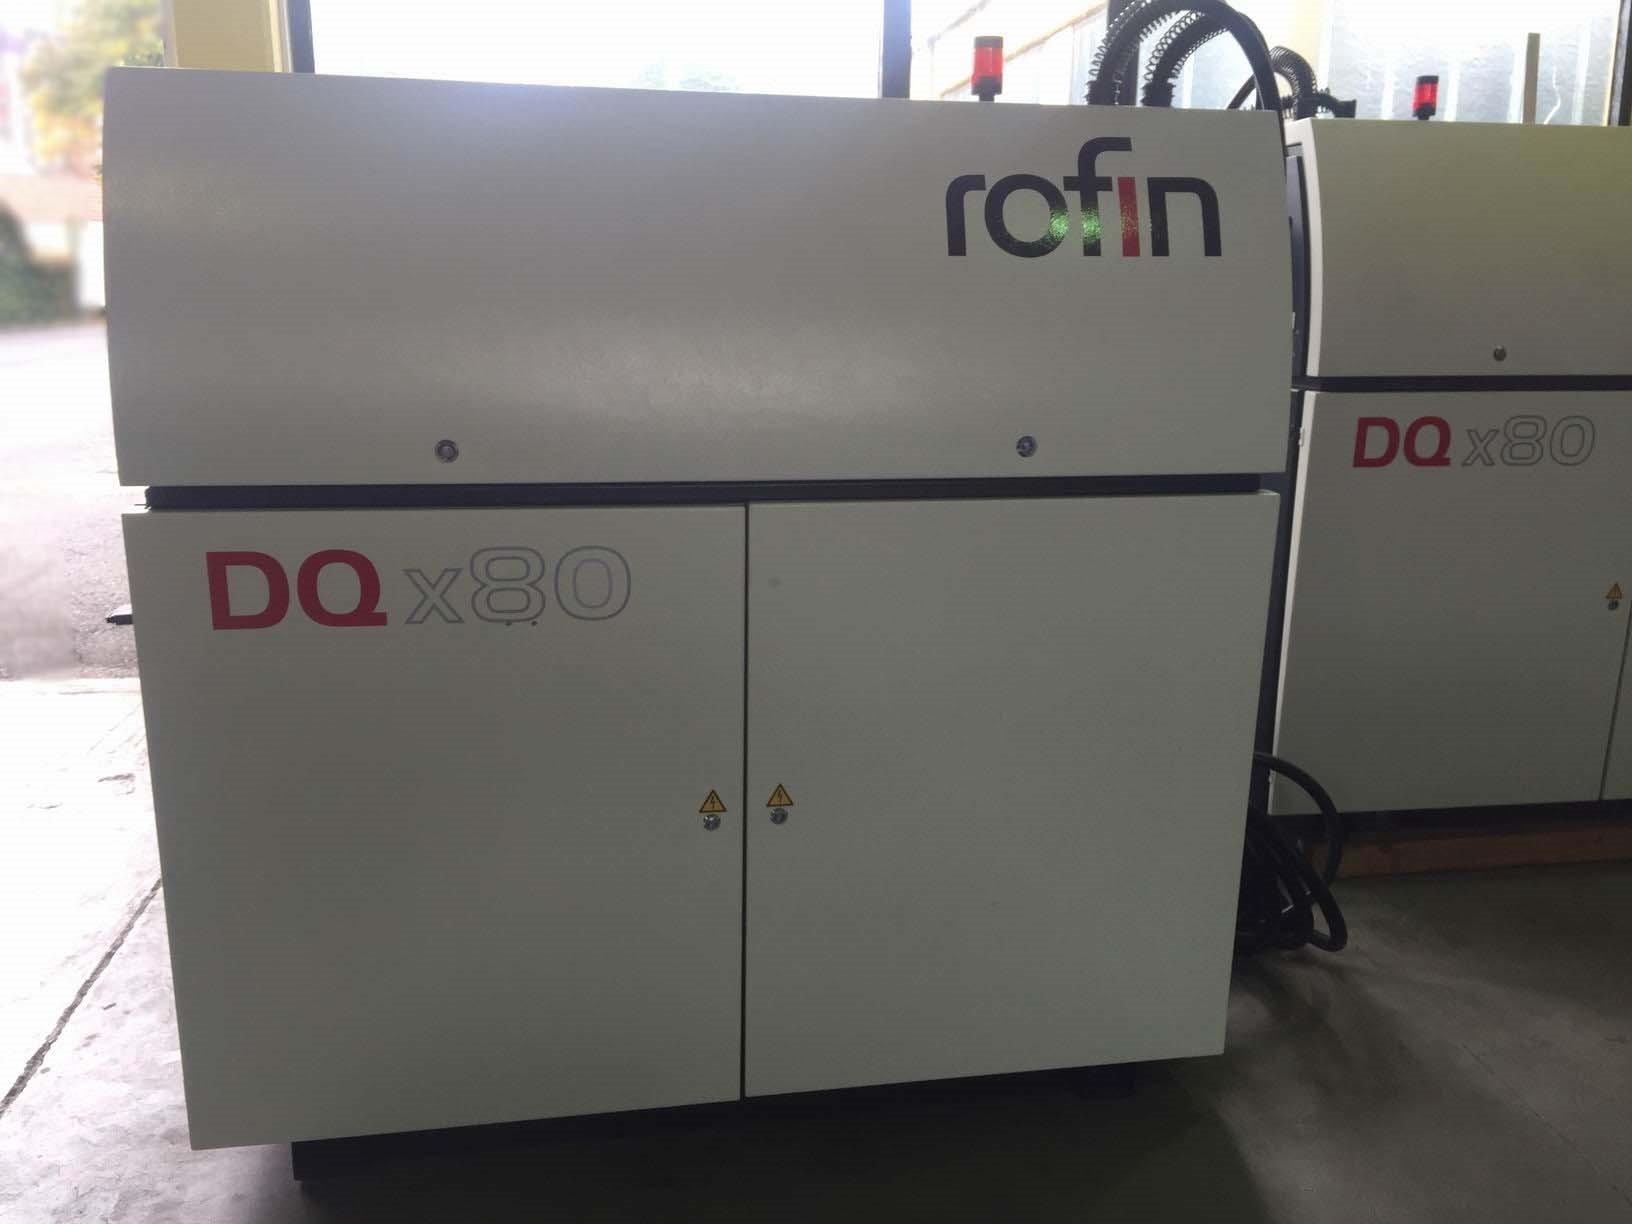 Photo Used ROFIN DQ x80 For Sale